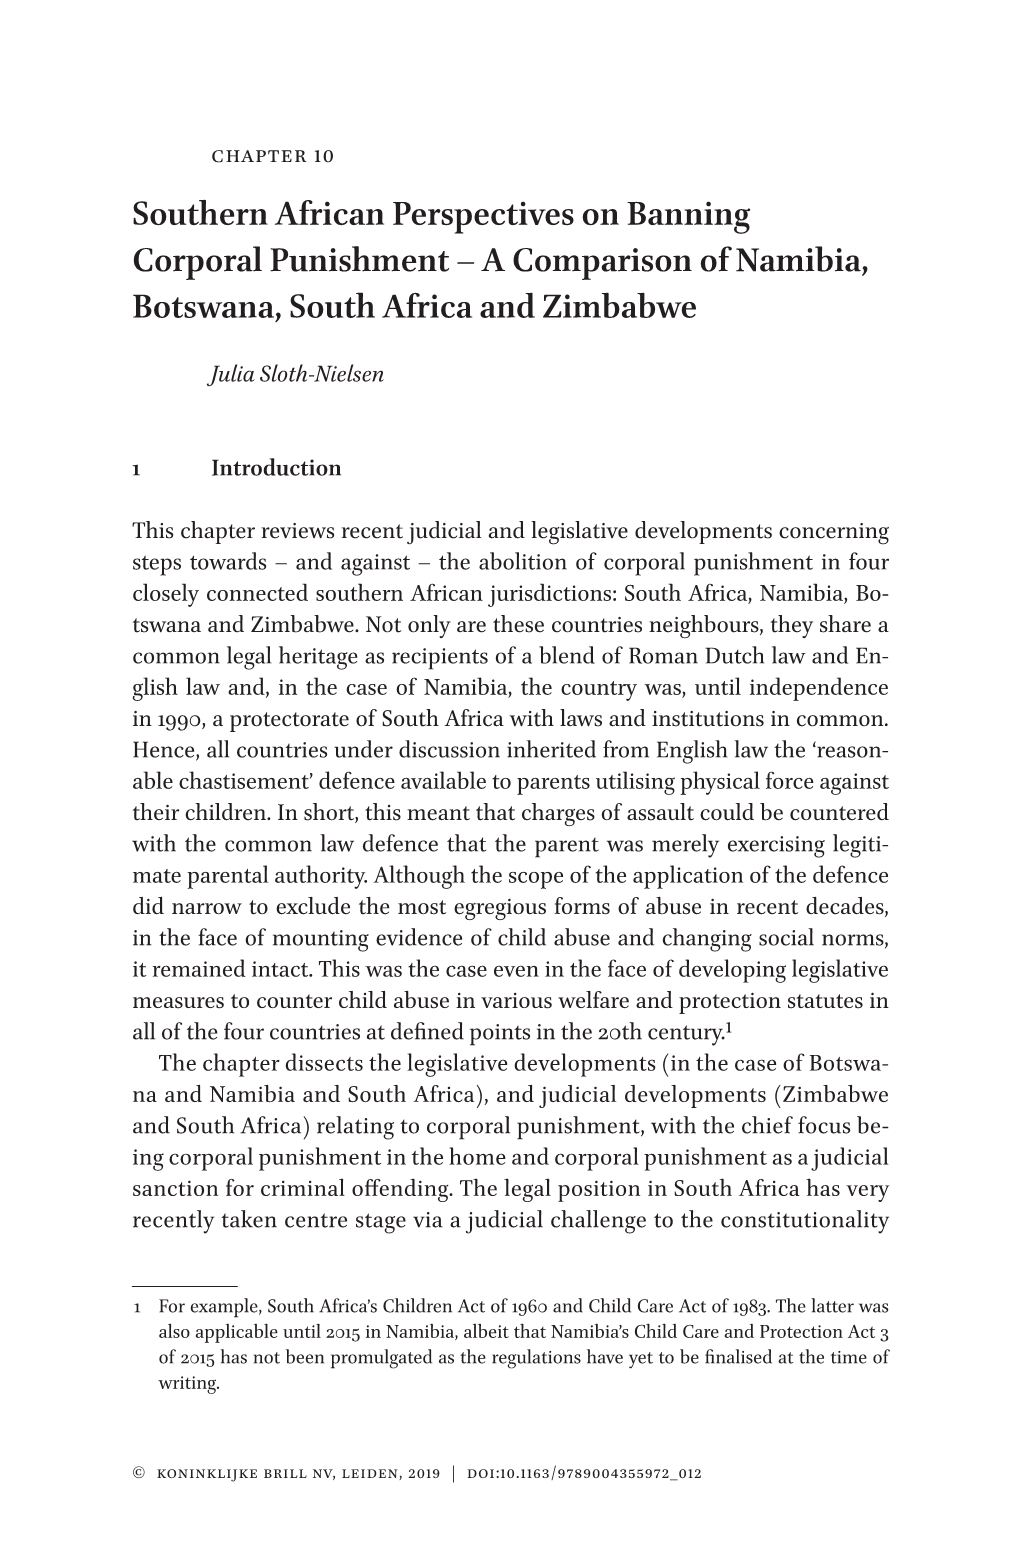 Southern African Perspectives on Banning Corporal Punishment –​ a Comparison of Namibia, Botswana, South Africa and Zimbabwe